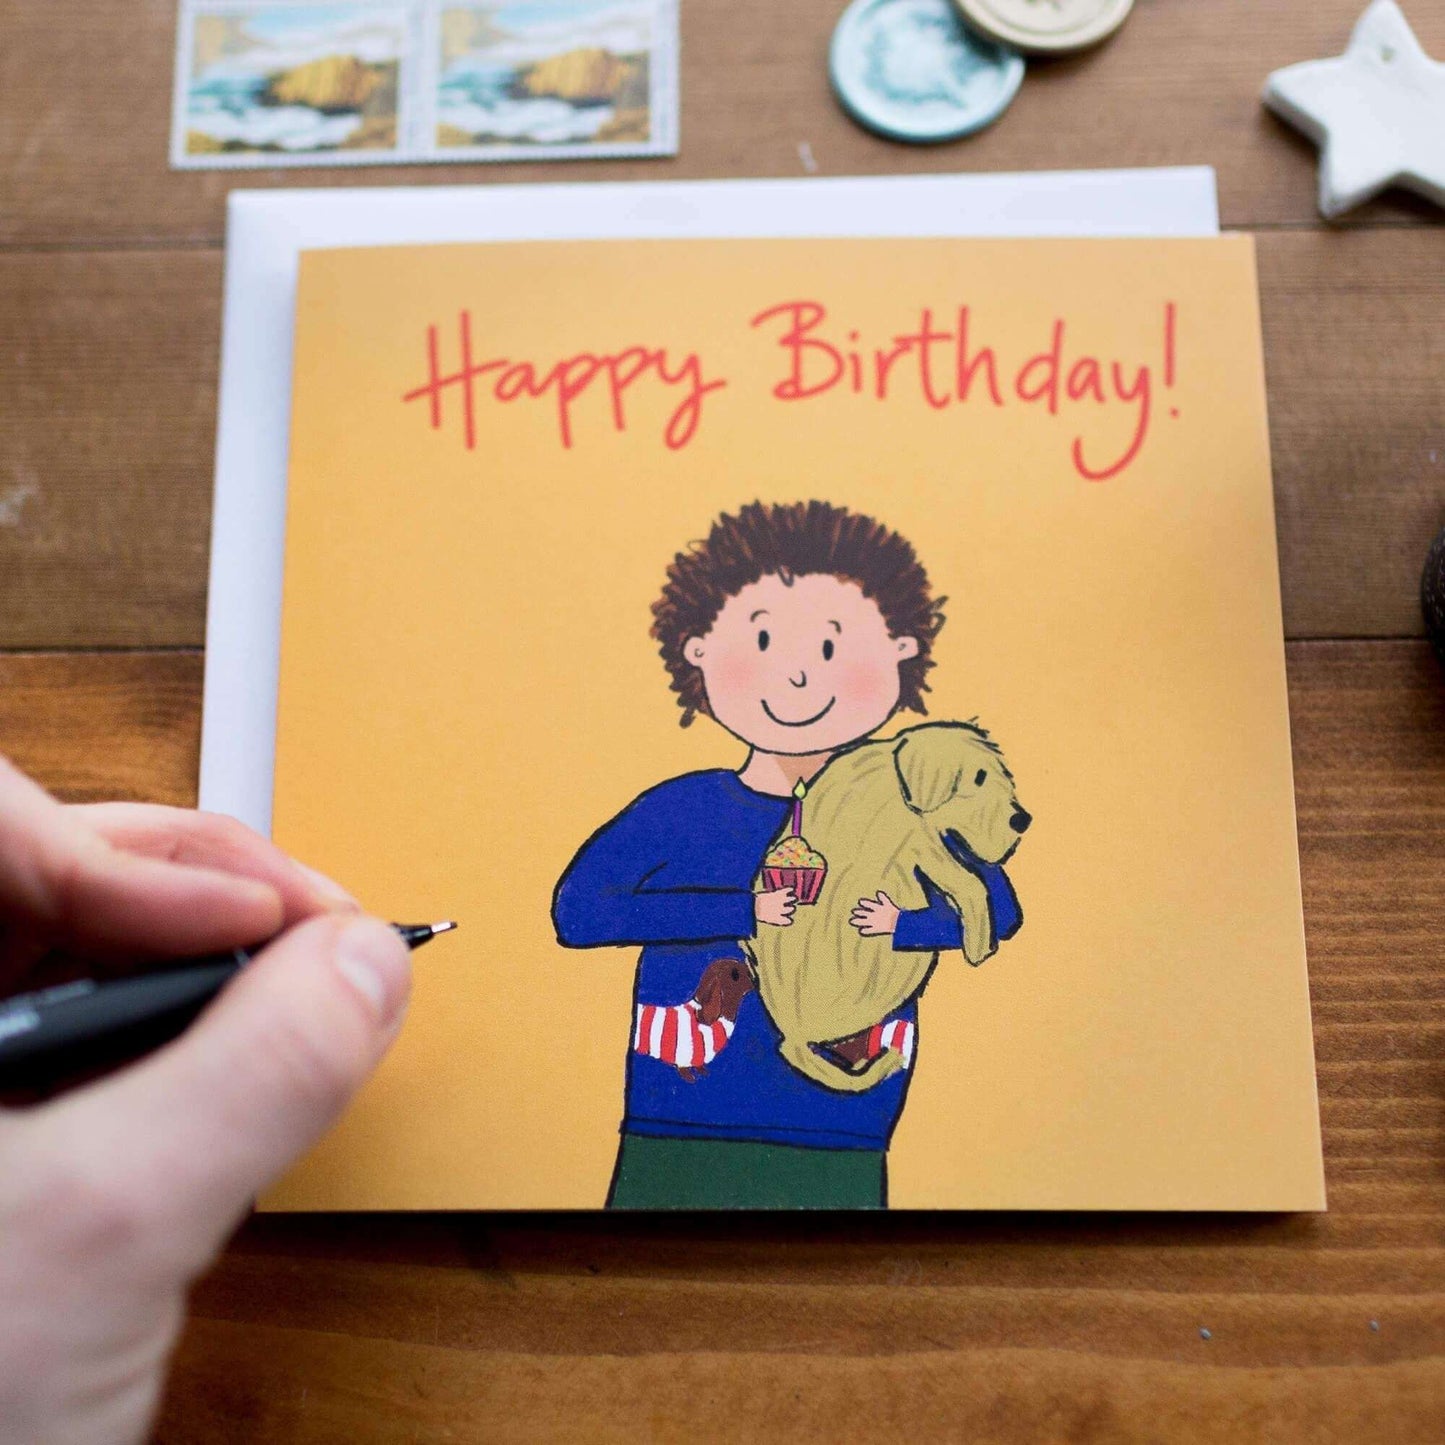 Boy with puppy birthday card And Hope Designs Greeting & Note Cards